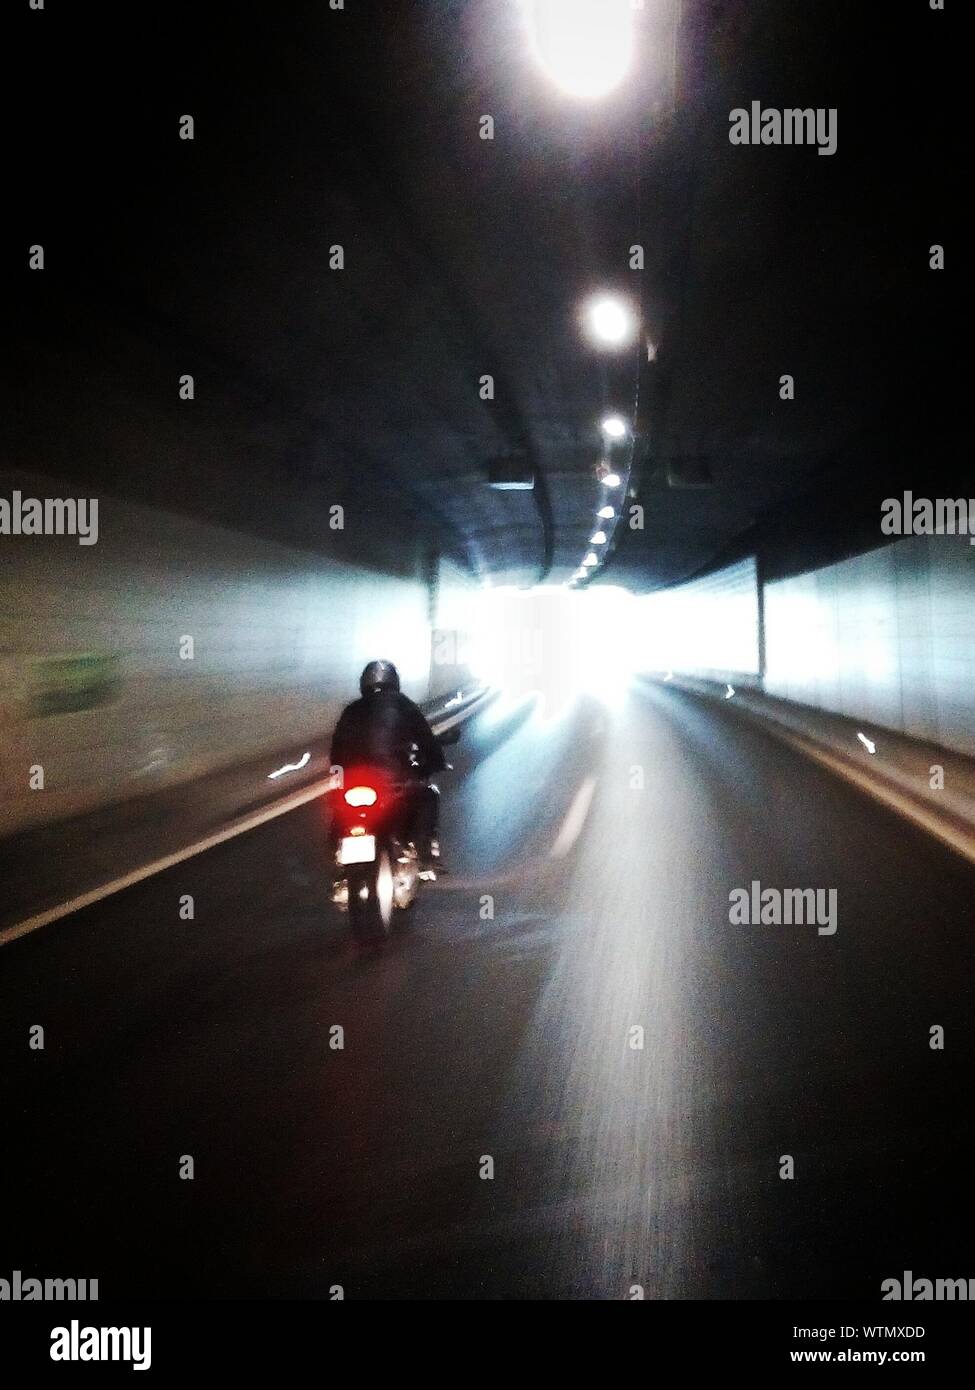 Motorcycling In Tunnel Stock Photo